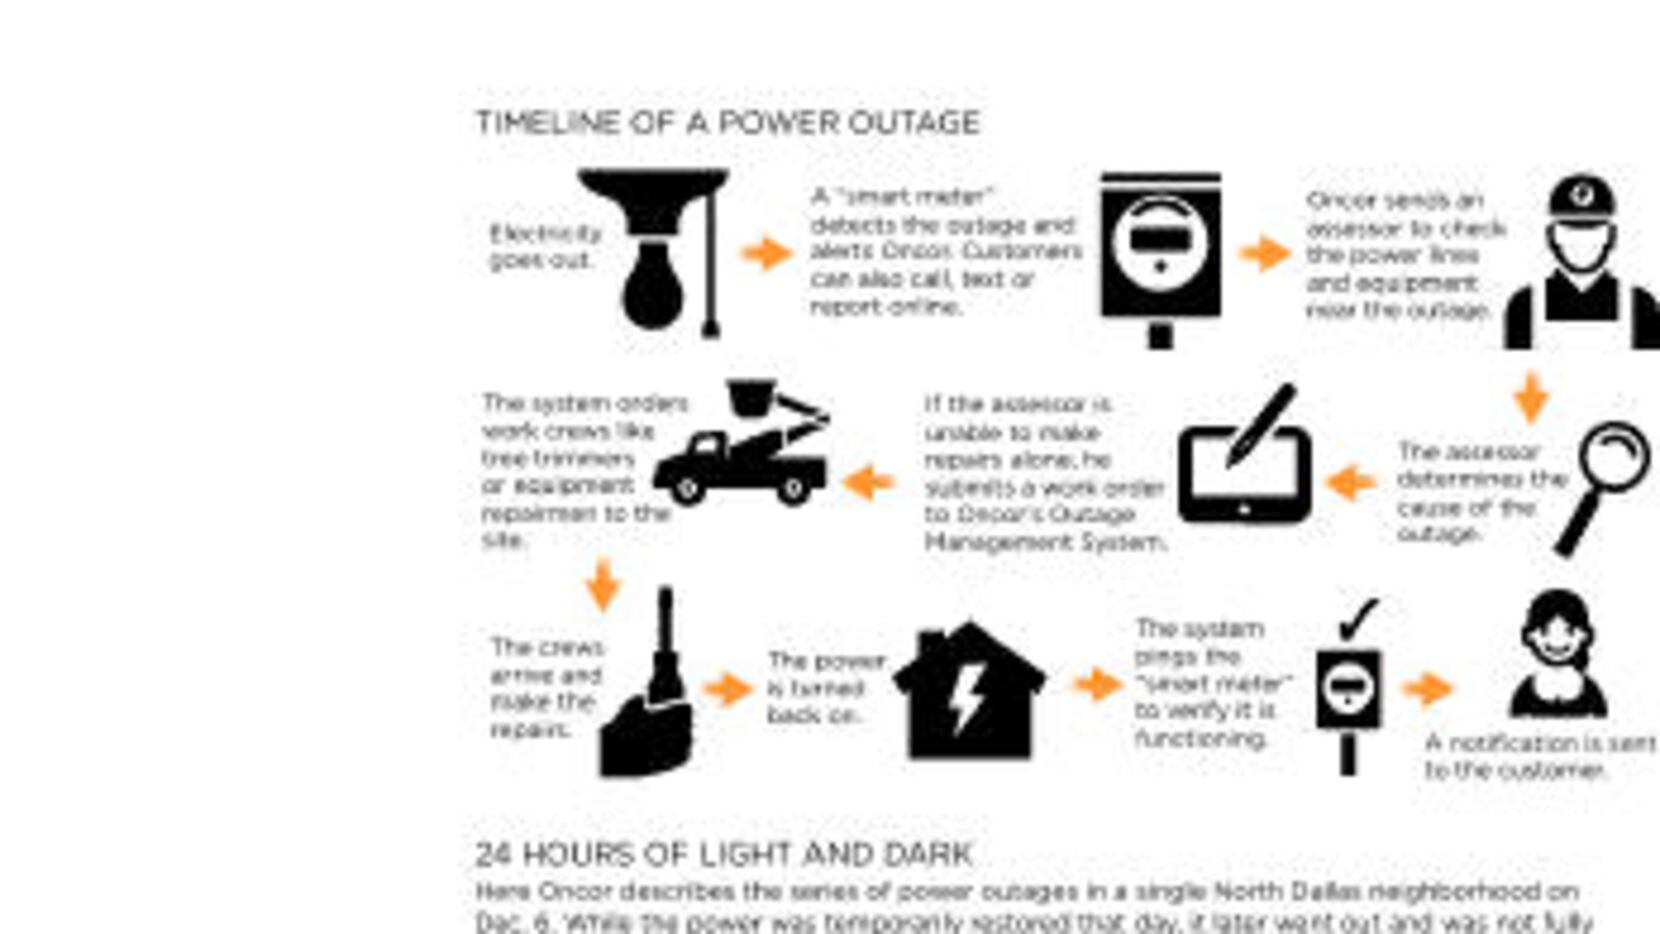 4 Essentials for A Long Term Emergency Power Outage [Infographic]